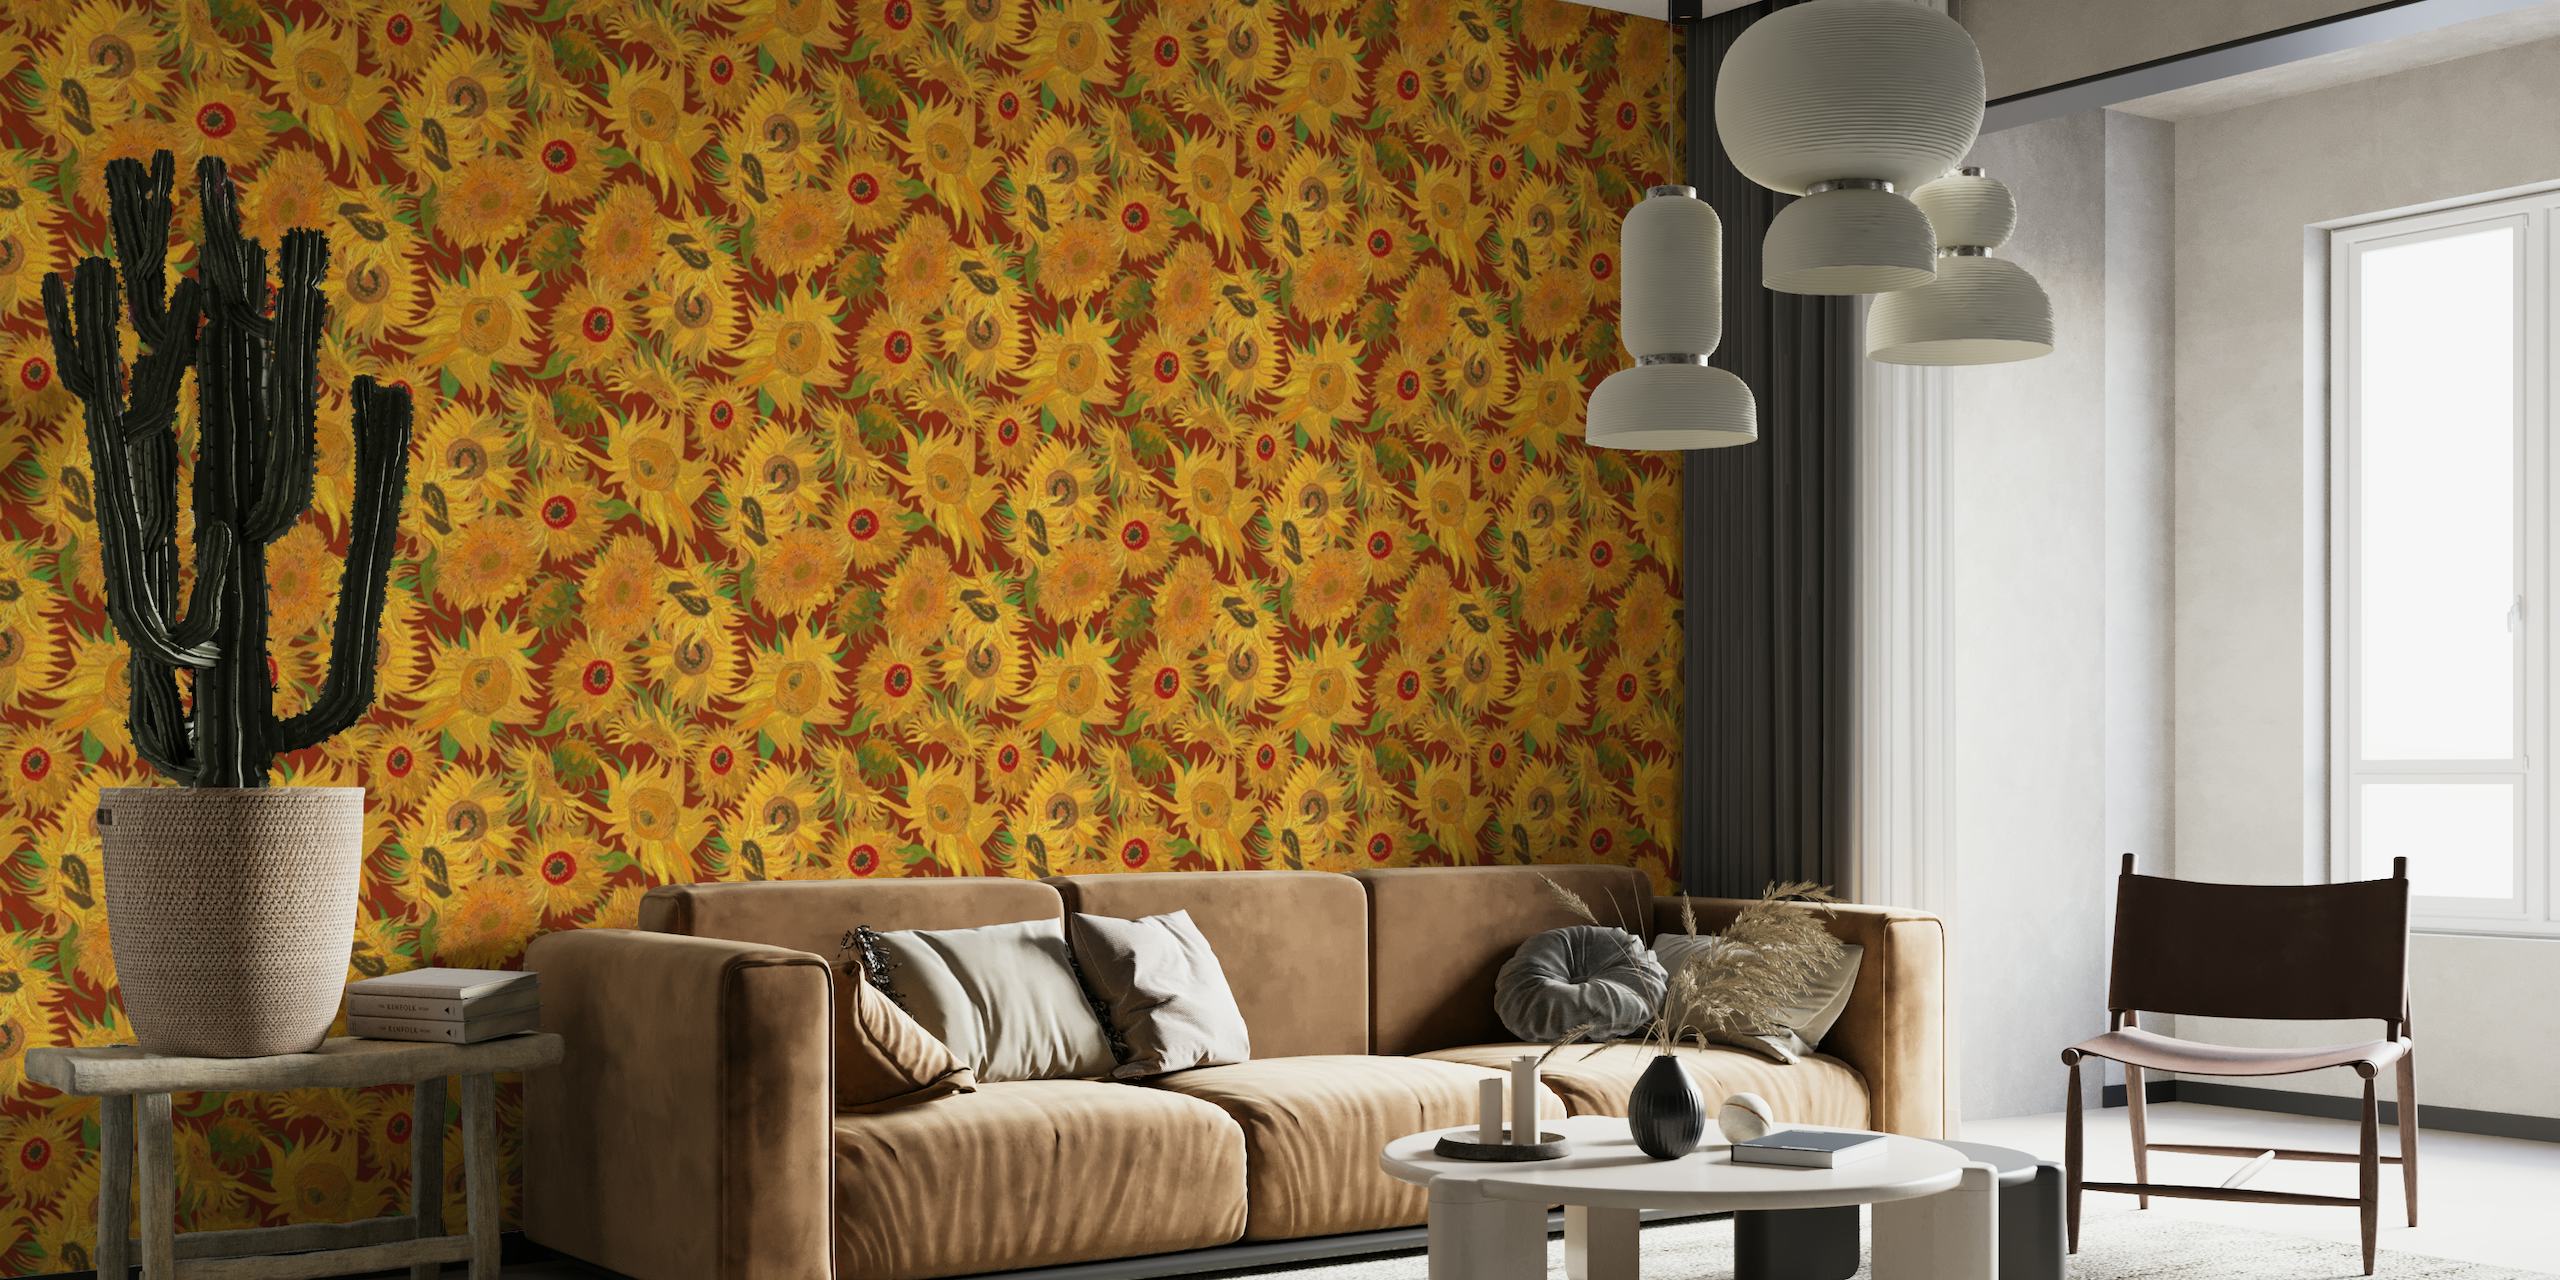 Van Gogh Sunflowers Pattern in yellow, green and burgundy red wallpaper